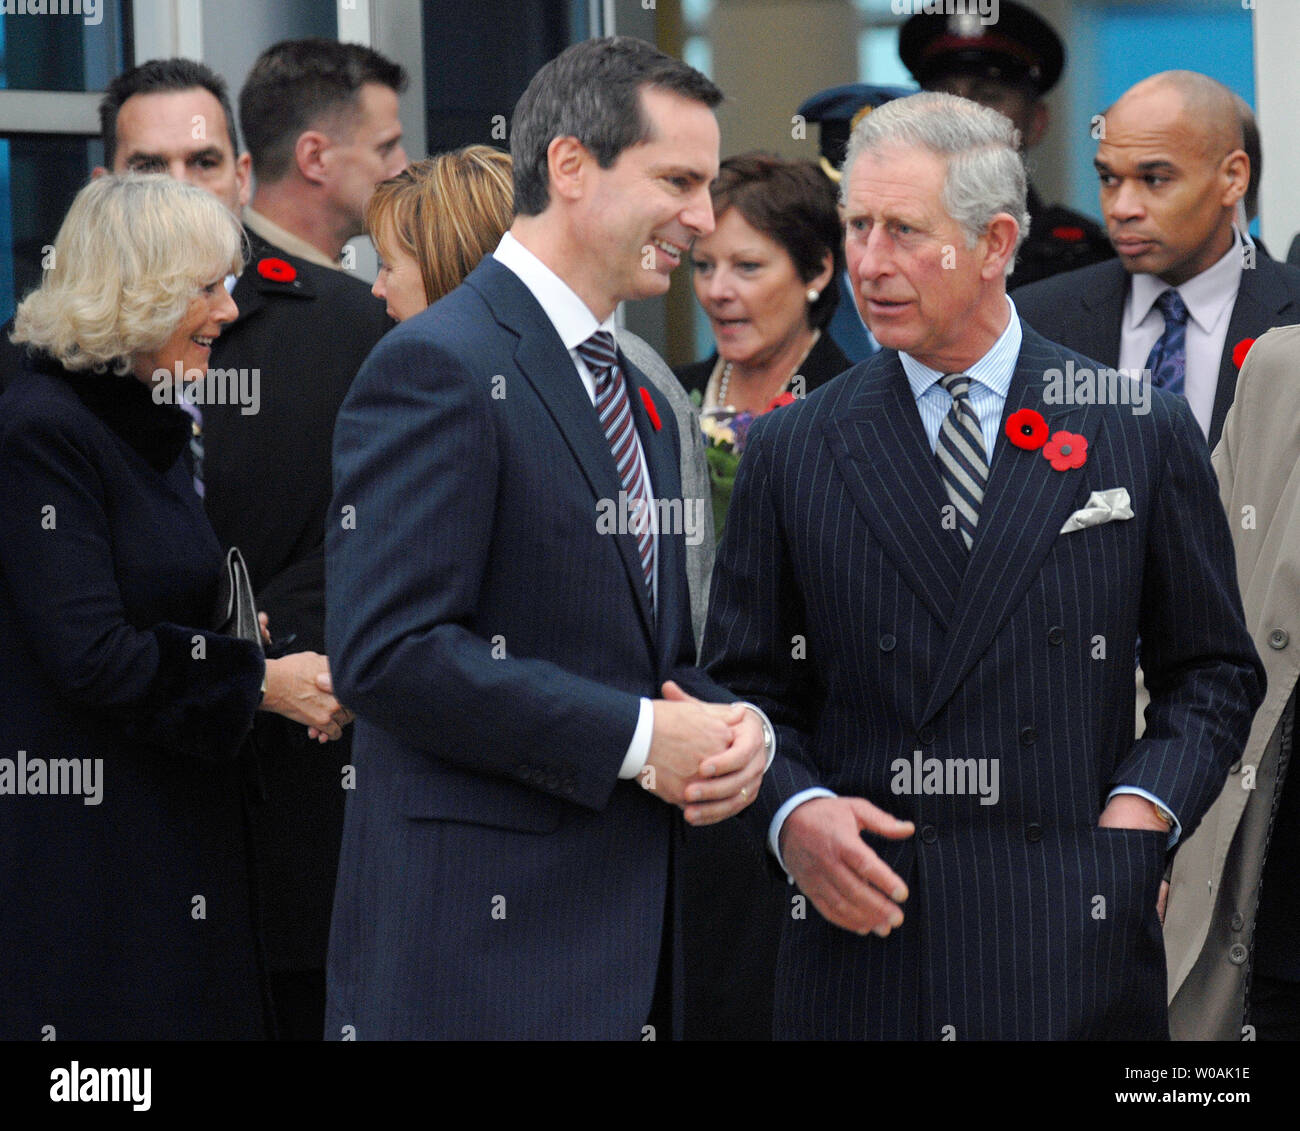 Britain's Prince Charles (R) and Ontario premier Dalton McGuinty chat as the Prince and his wife Camilla, Duchess of Cornwall (L), arrive at Pearson International Airport in Toronto, Canada on November 4, 2009.  The royal couple are on an 11-day tour of Canada.  UPI /Christine Chew Stock Photo